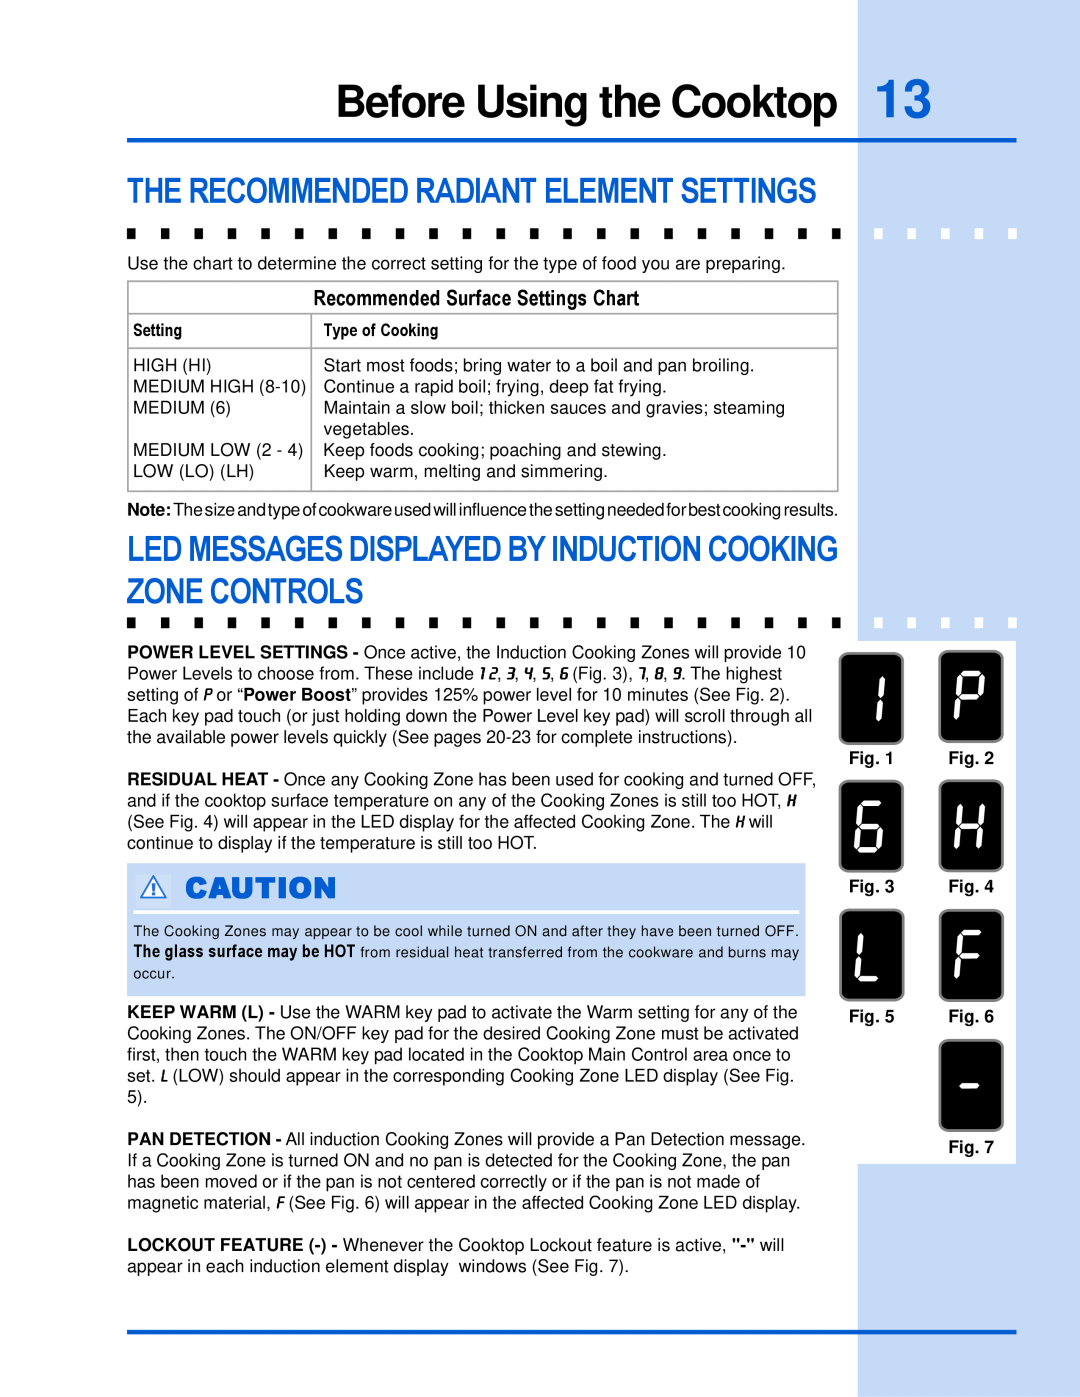 Electrolux 318 203 603 (0709) manual The Recommended Radiant Element Settings, Recommended Surface Settings Chart 